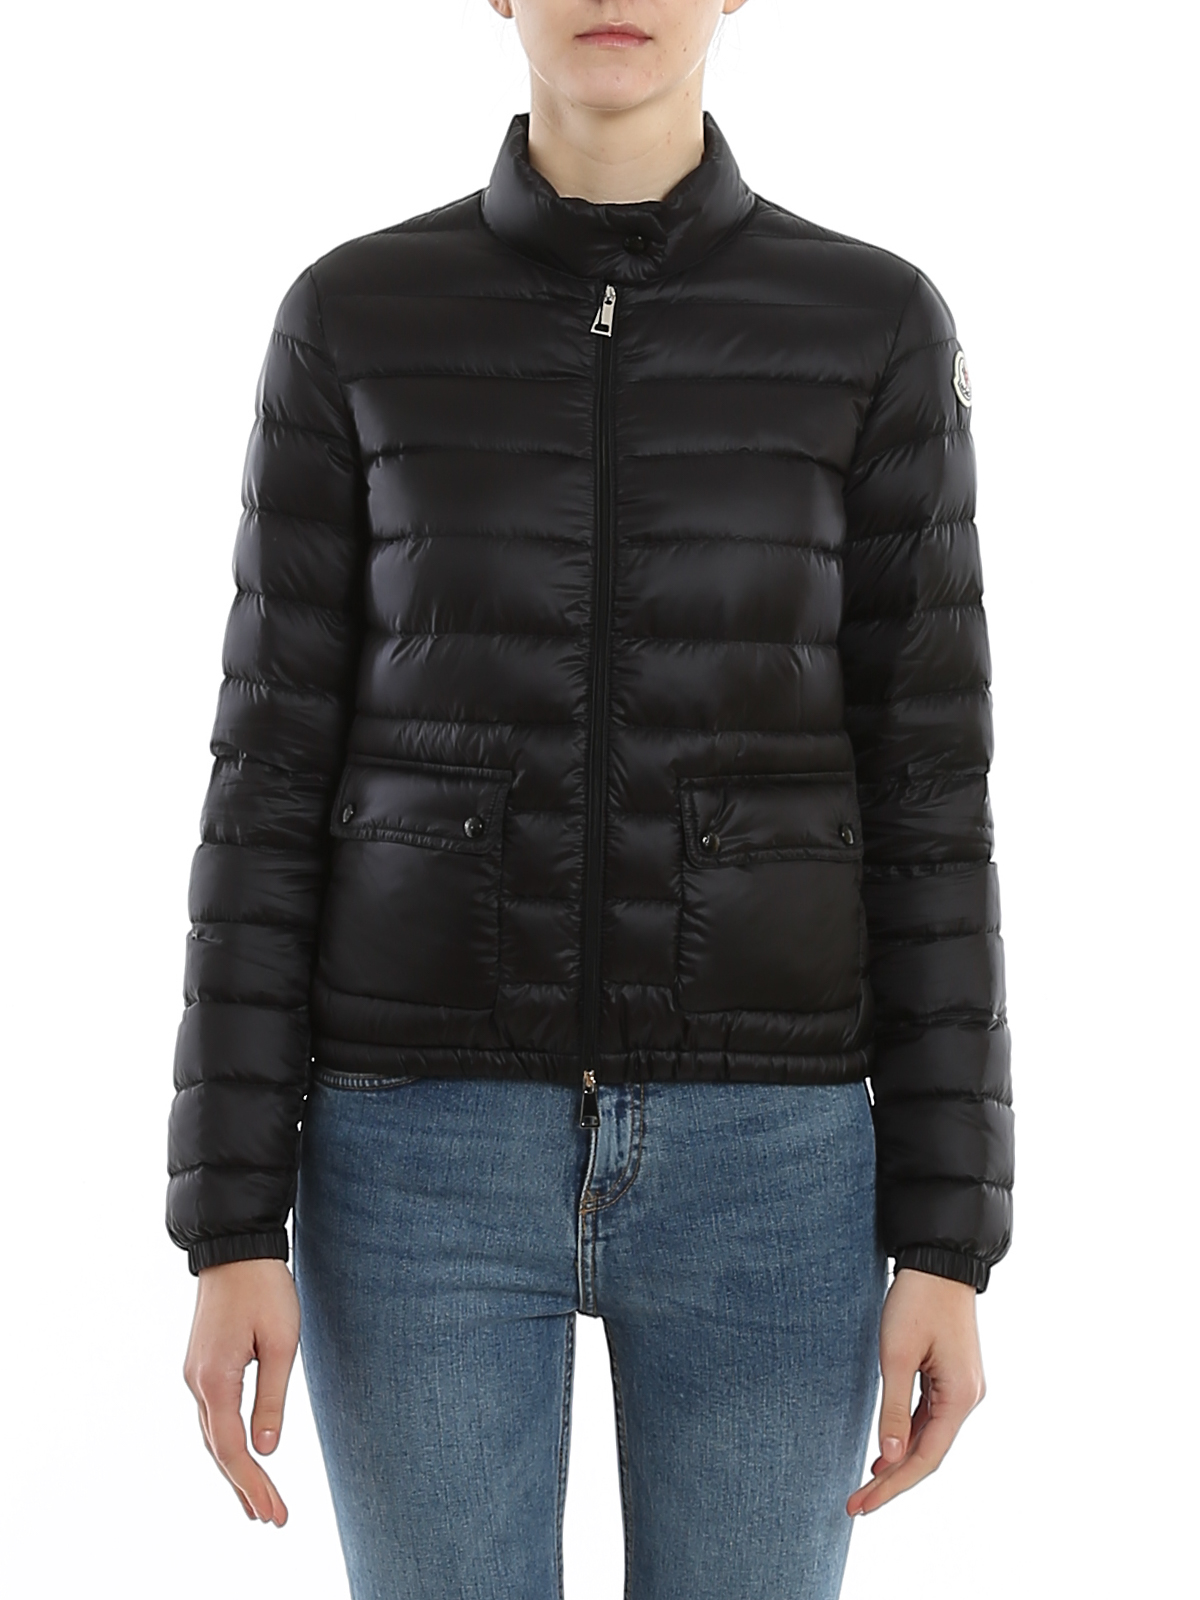 Moncler Lans Down Jacket Top Sellers, 64% OFF | www.ilpungolo.org